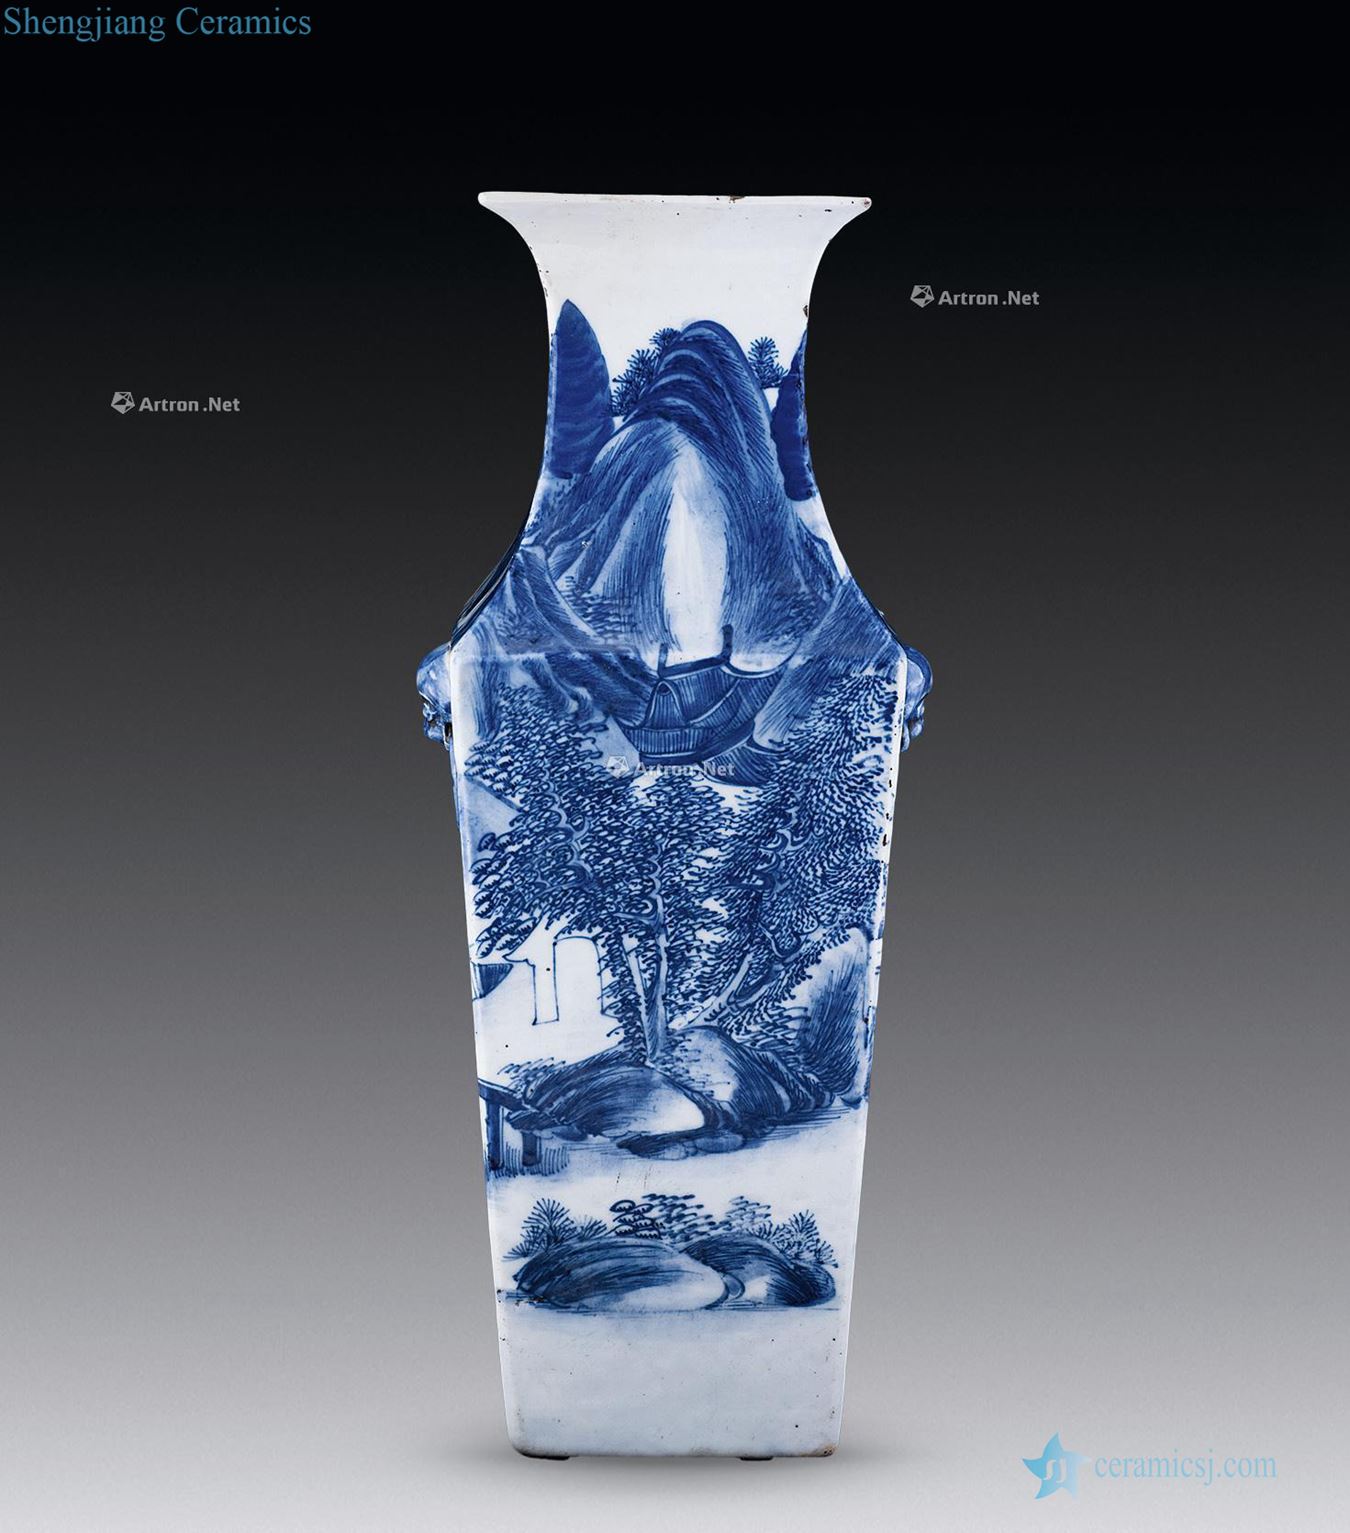 Qing daoguang Blue and white landscape character bottles